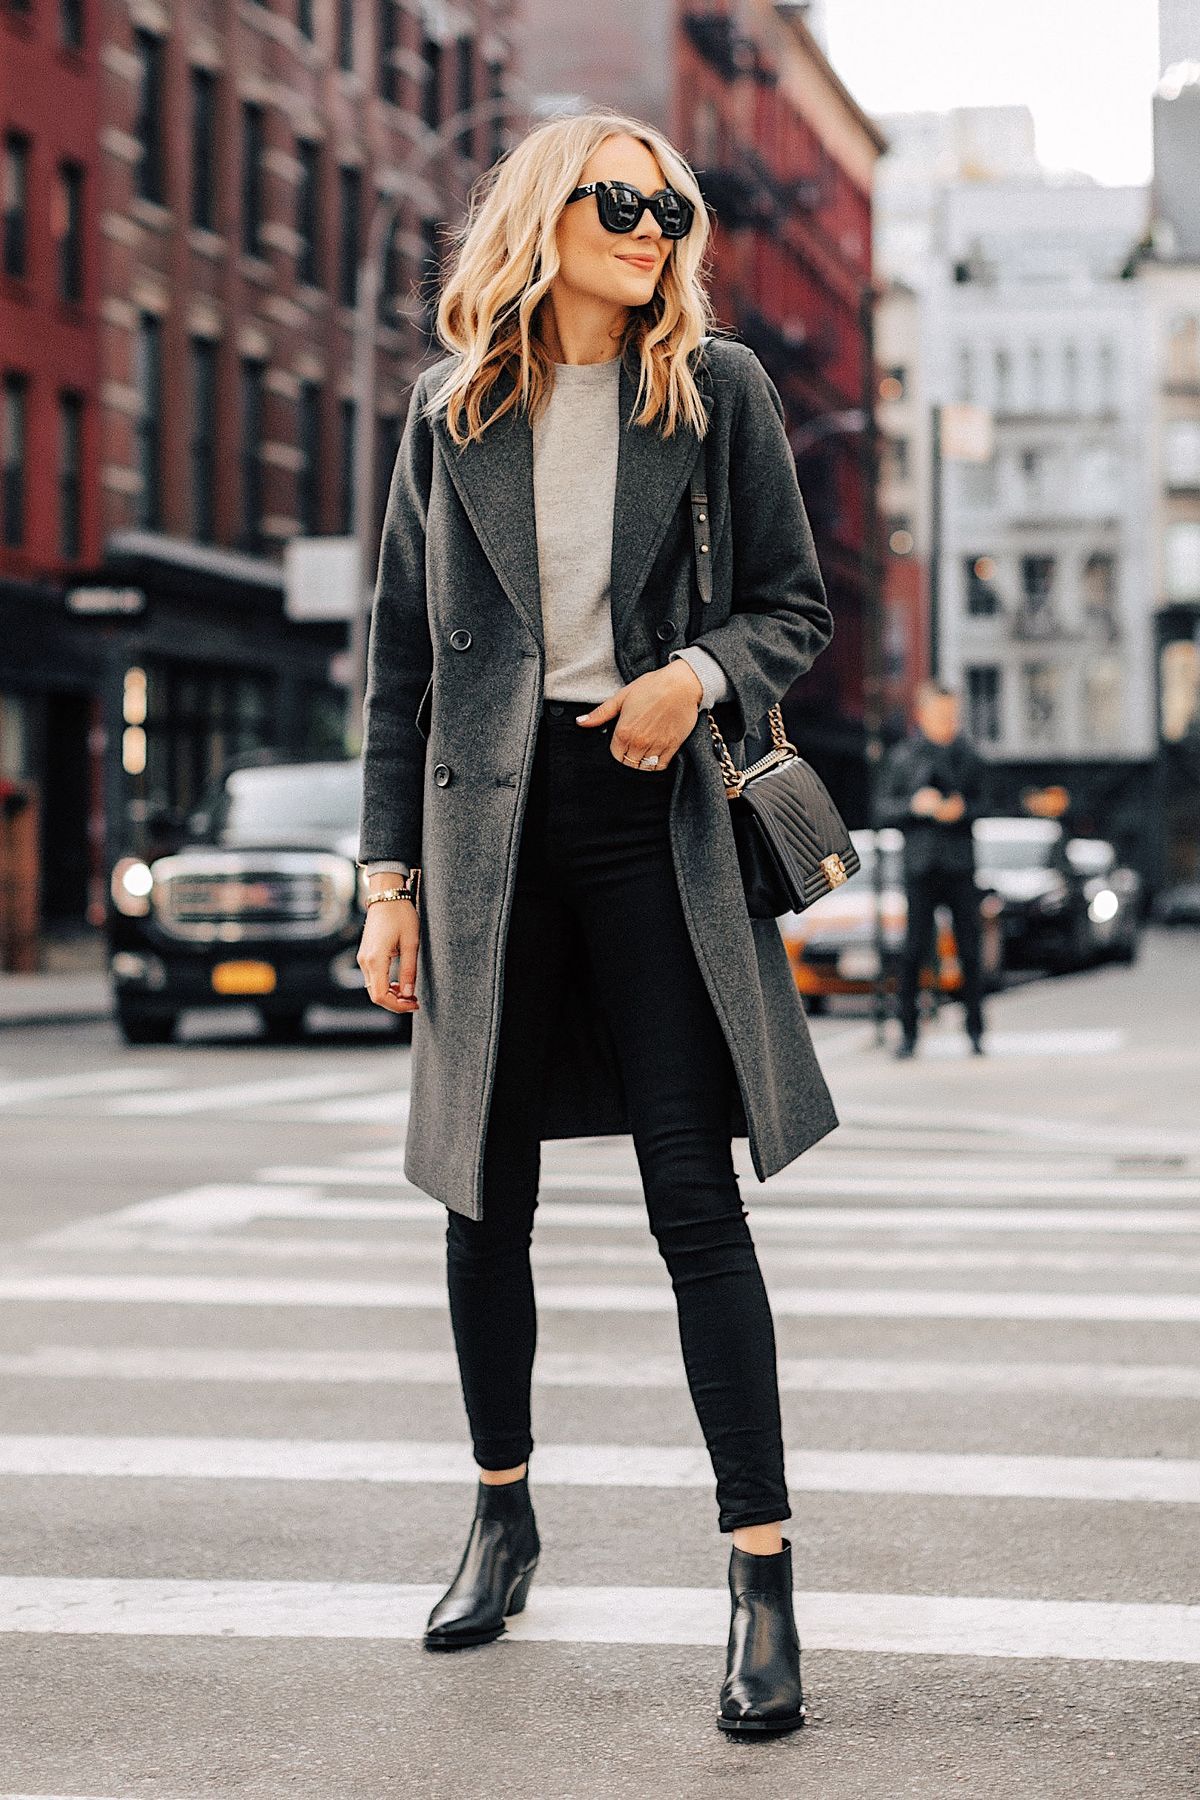 The Classic Winter Outfit From Everlane I Wore in NYC | Fashion Jackson - The Classic Winter Outfit From Everlane I Wore in NYC | Fashion Jackson -   19 new york style Winter ideas